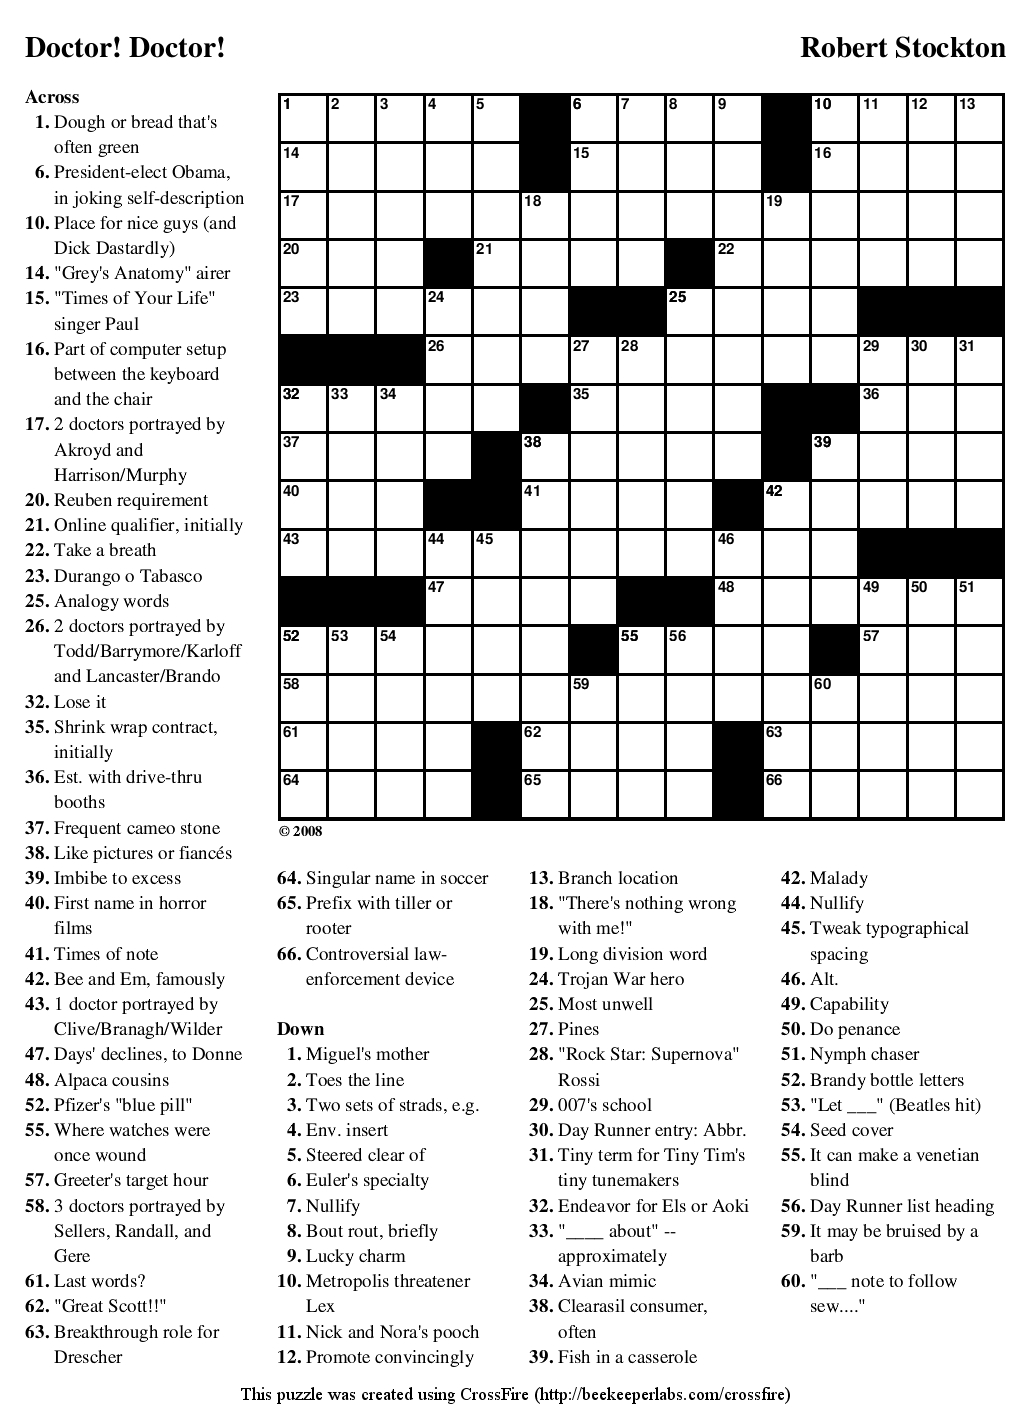 Crossword Puzzles Printable - Yahoo Image Search Results | Crossword - Computer Crossword Puzzles Printable